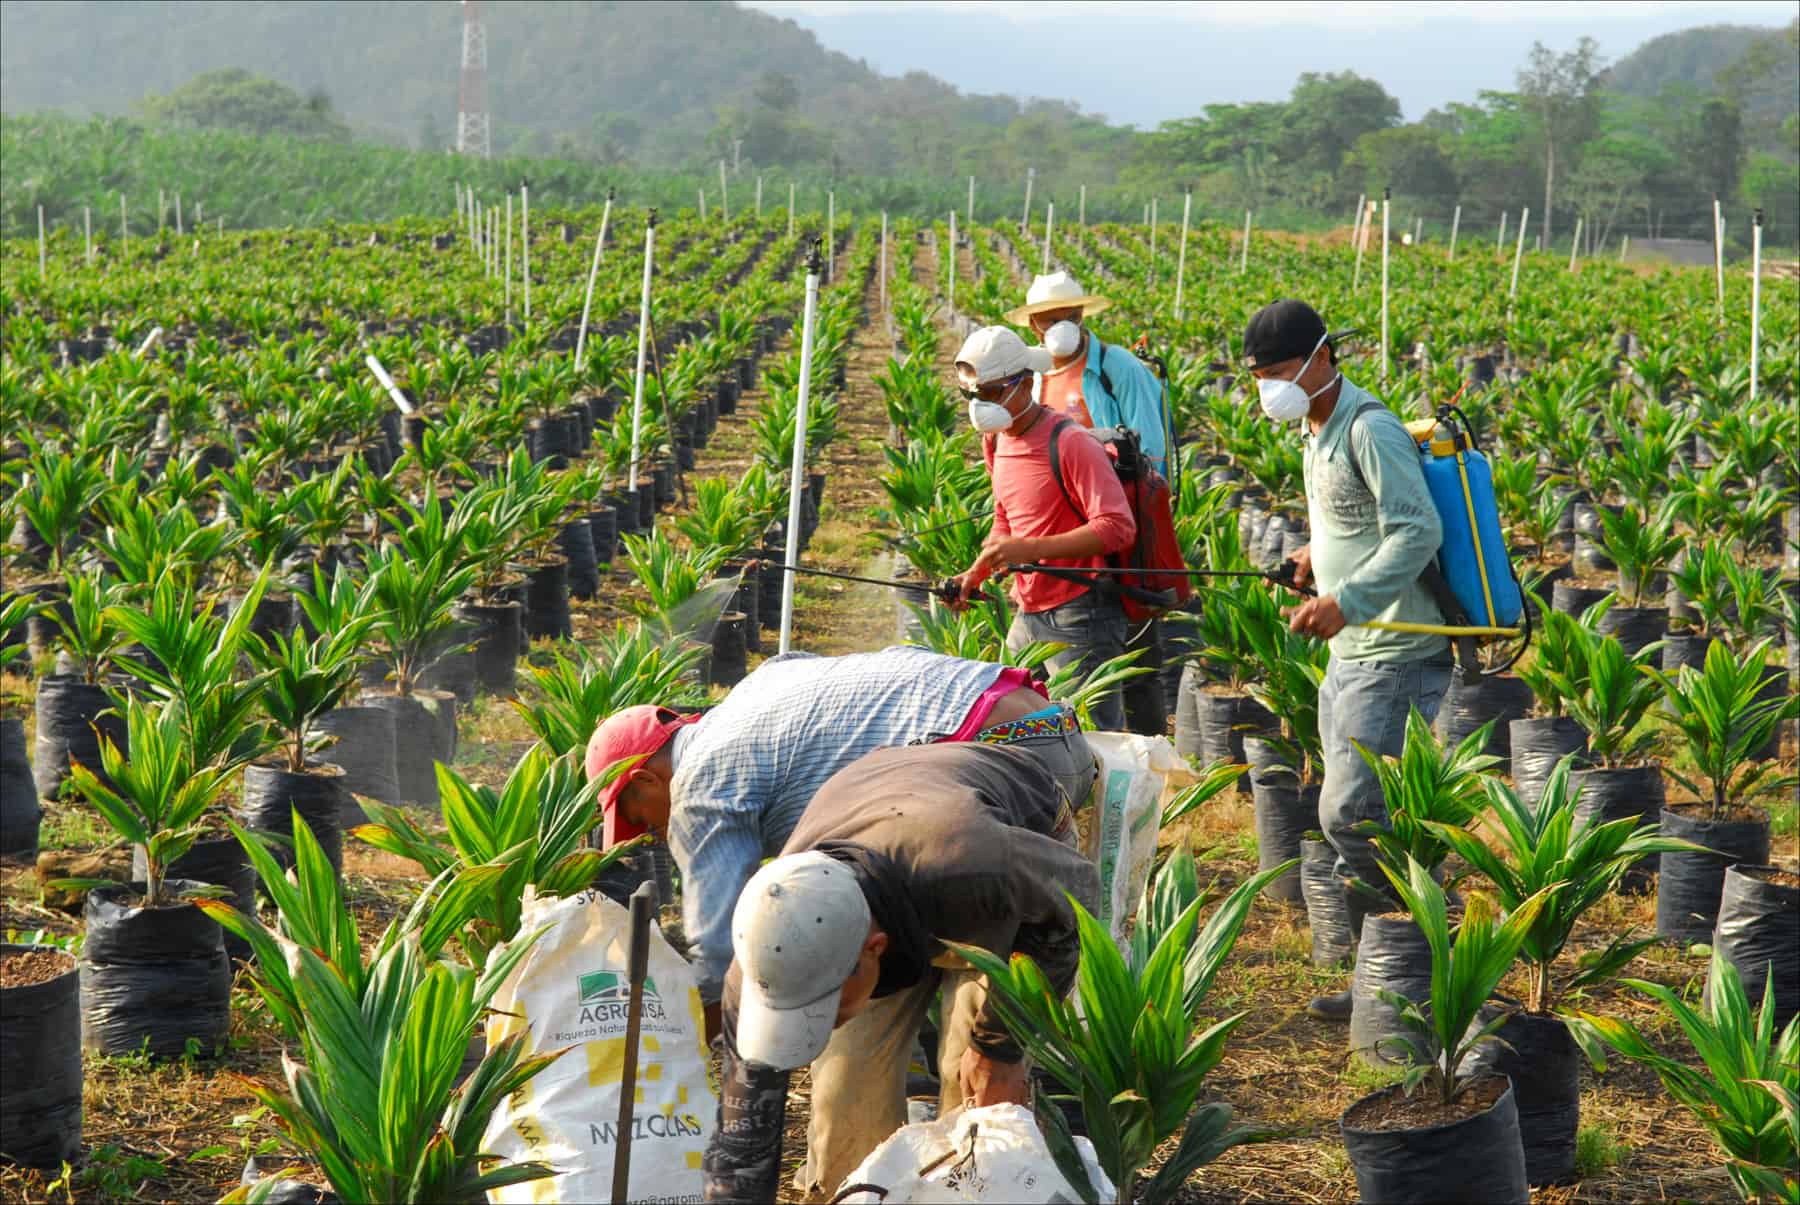 Farmworkers spray pesticides on baby African palm trees at the Finca Victoria nursery, about 35 kilometers from the Mexican border in the department of Alta Verapaz, Guatemala, May 10, 2014.